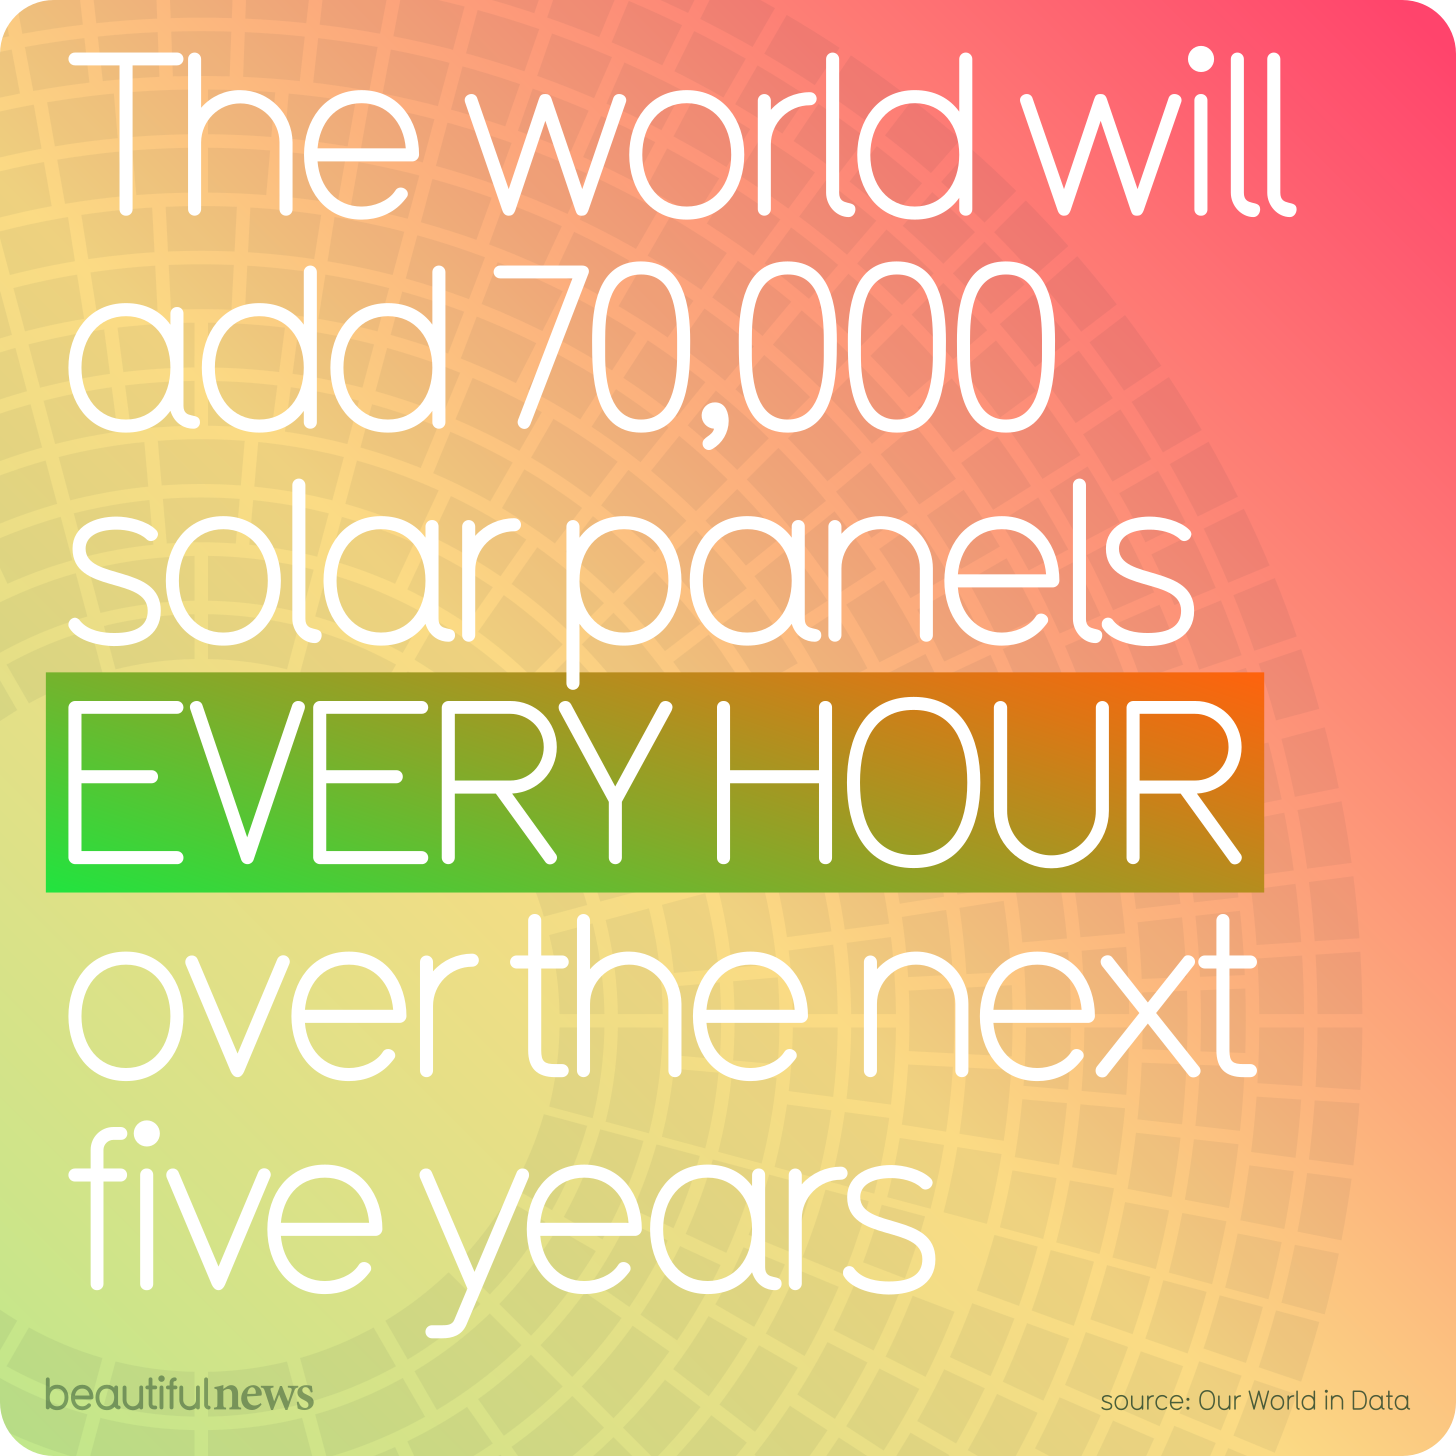 The world will add 70,000 solar panels every hour in the next 5 years